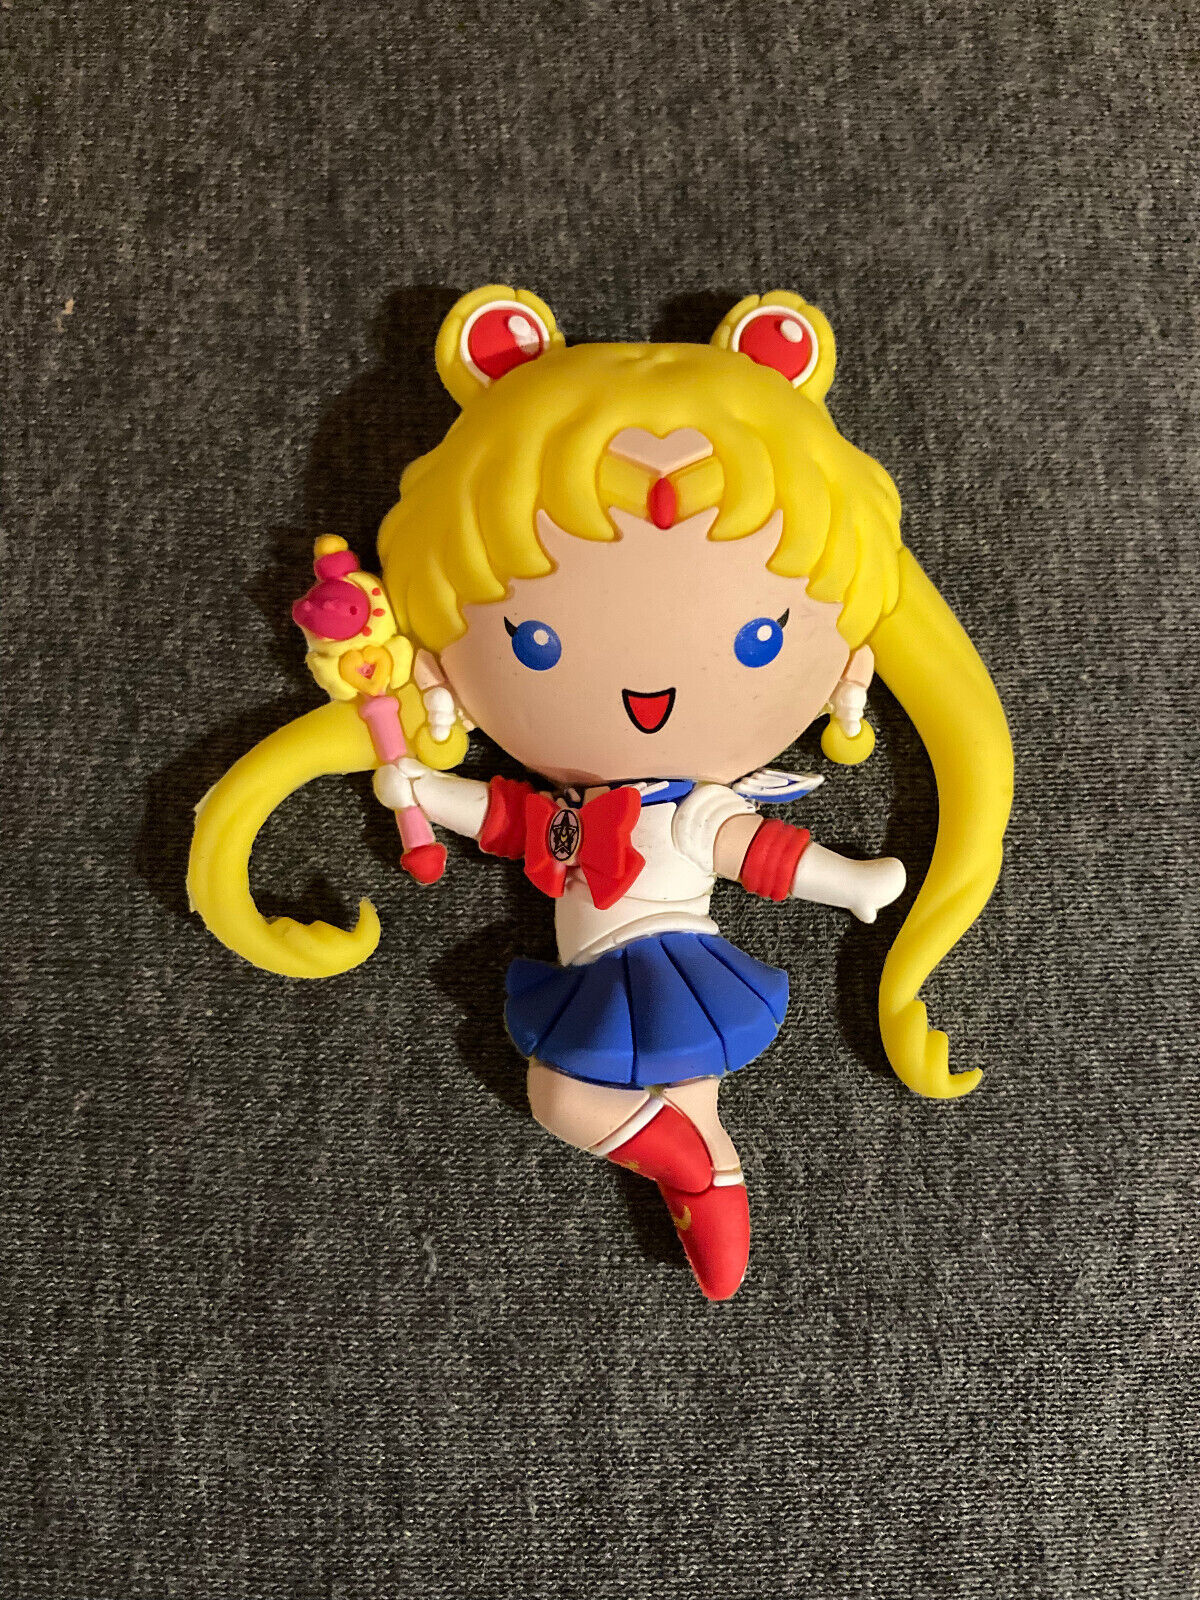 Toei Sailor Moon Anime Figure Figural Magnet Series 4 - CHOOSE YOUR CHARACTER